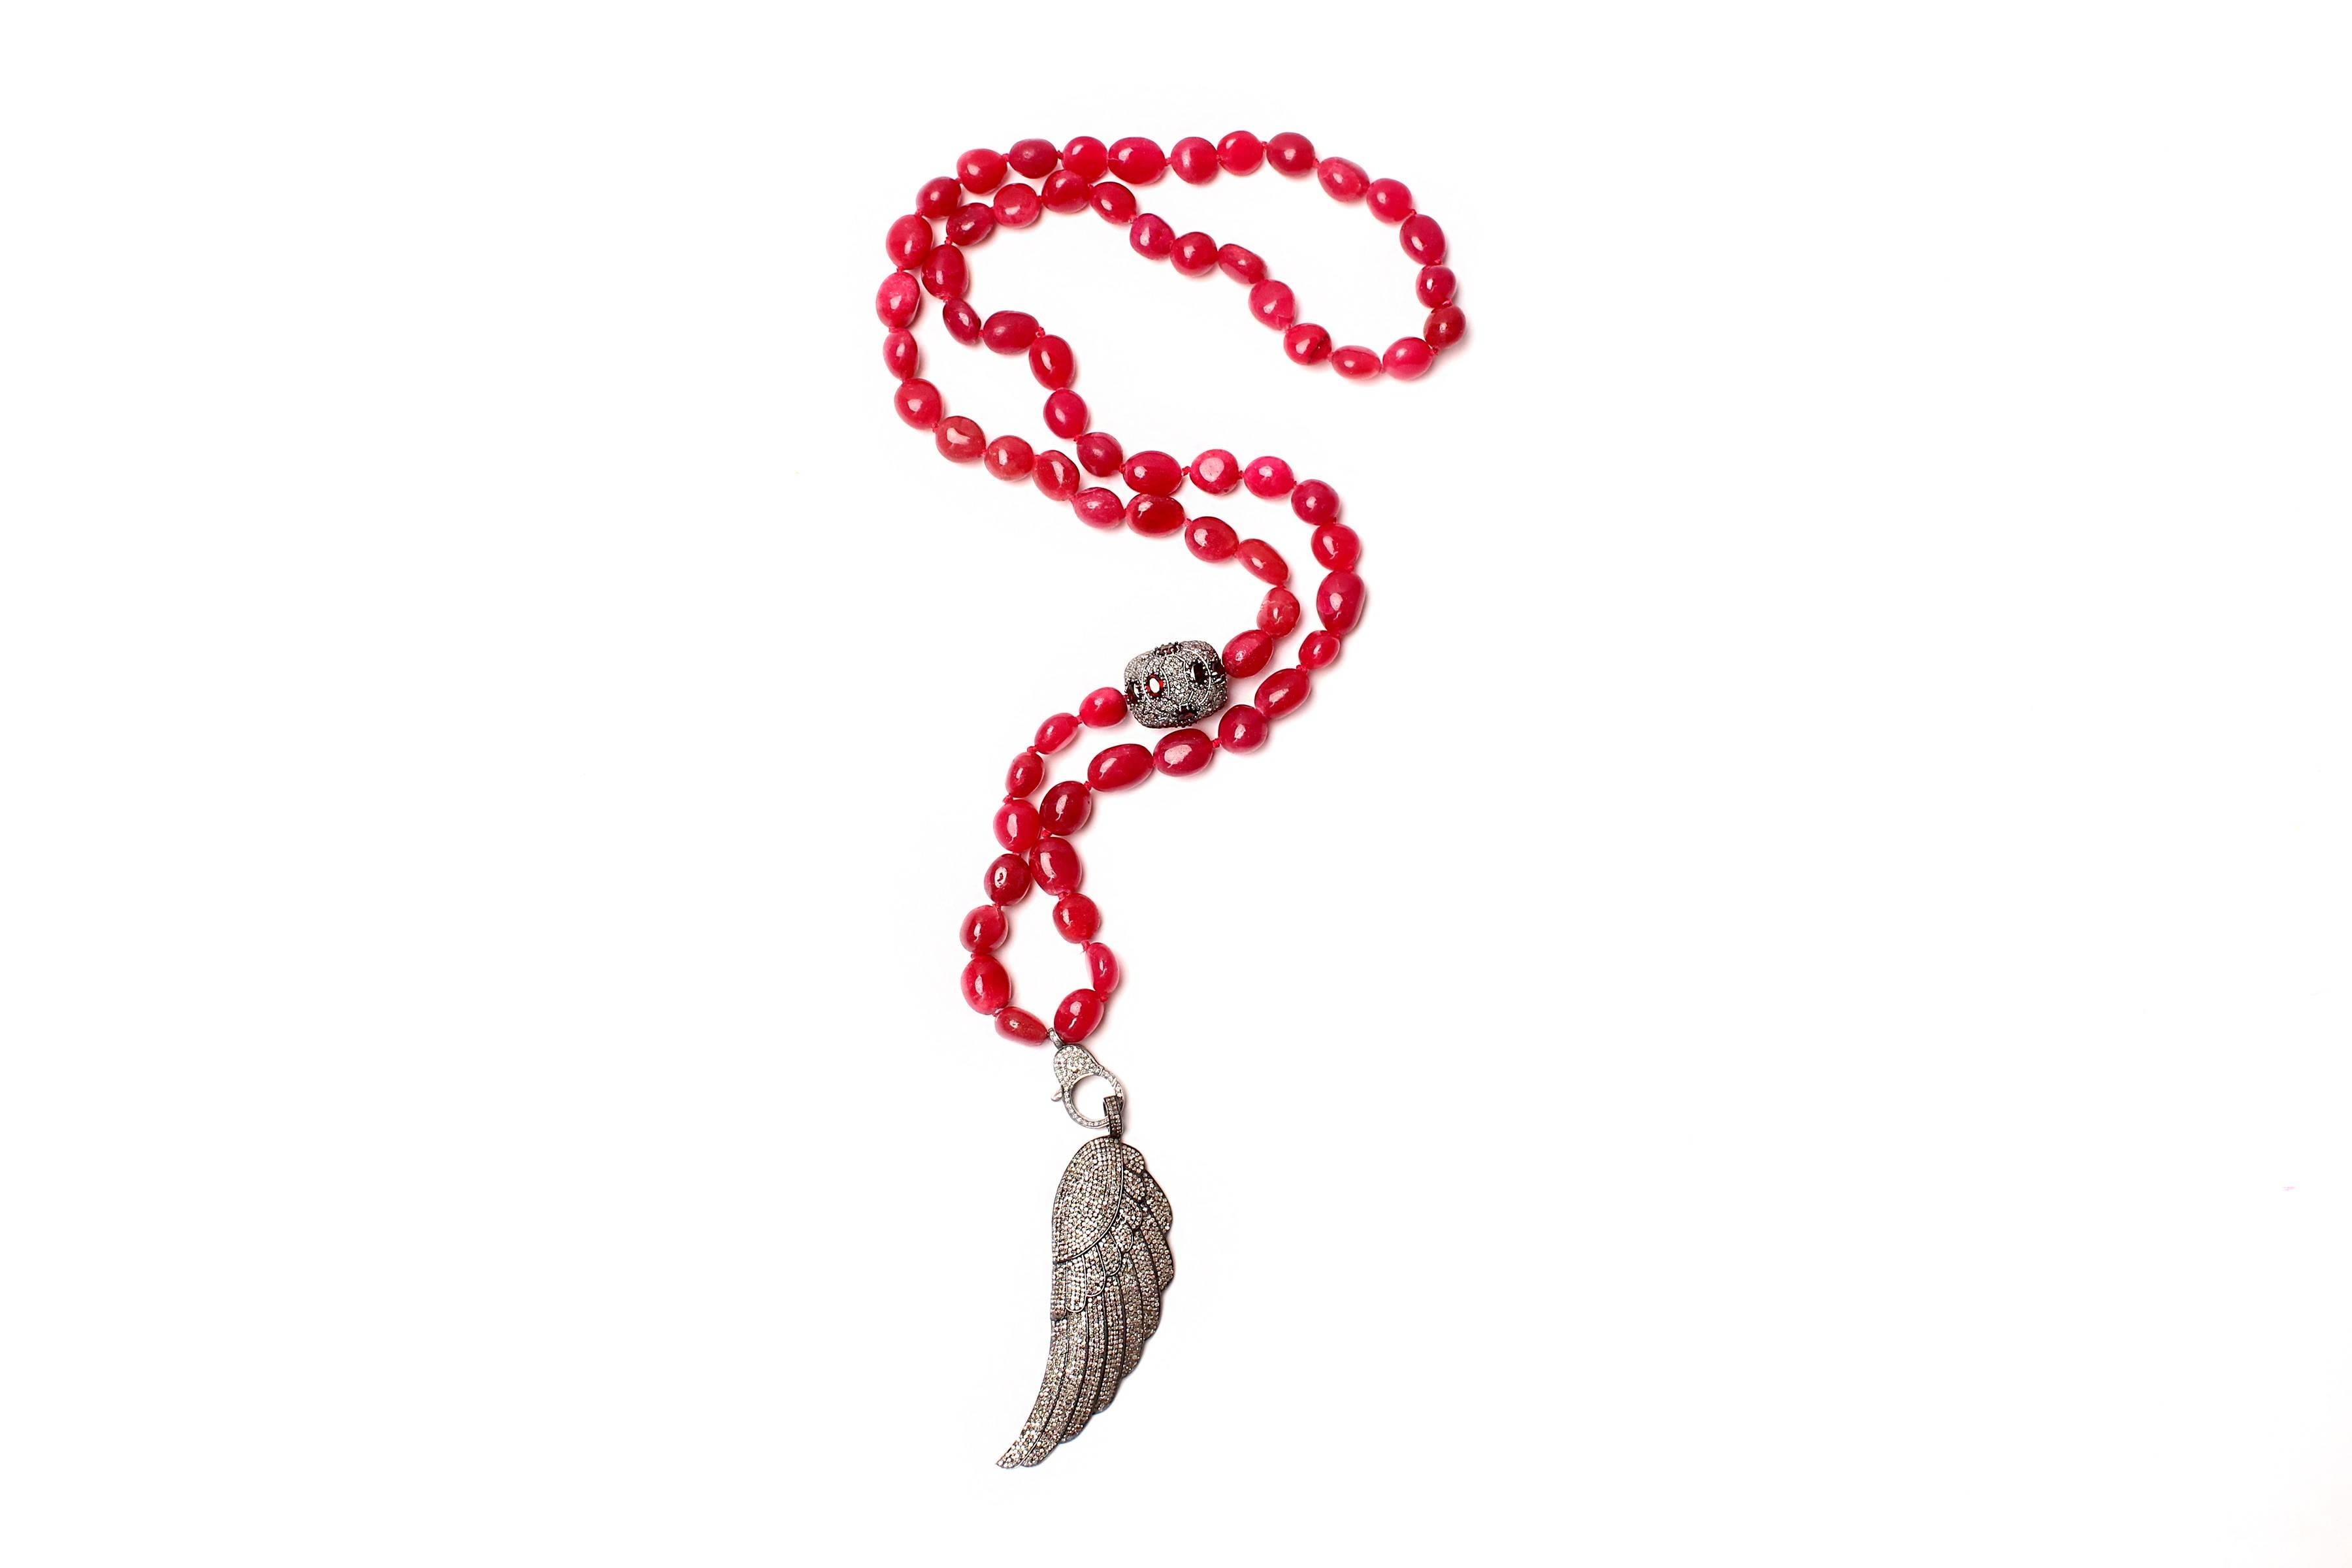 Contemporary Clarissa Bronfman Diamond Angel Wing on Raw Cut Moroccan Ruby Necklace